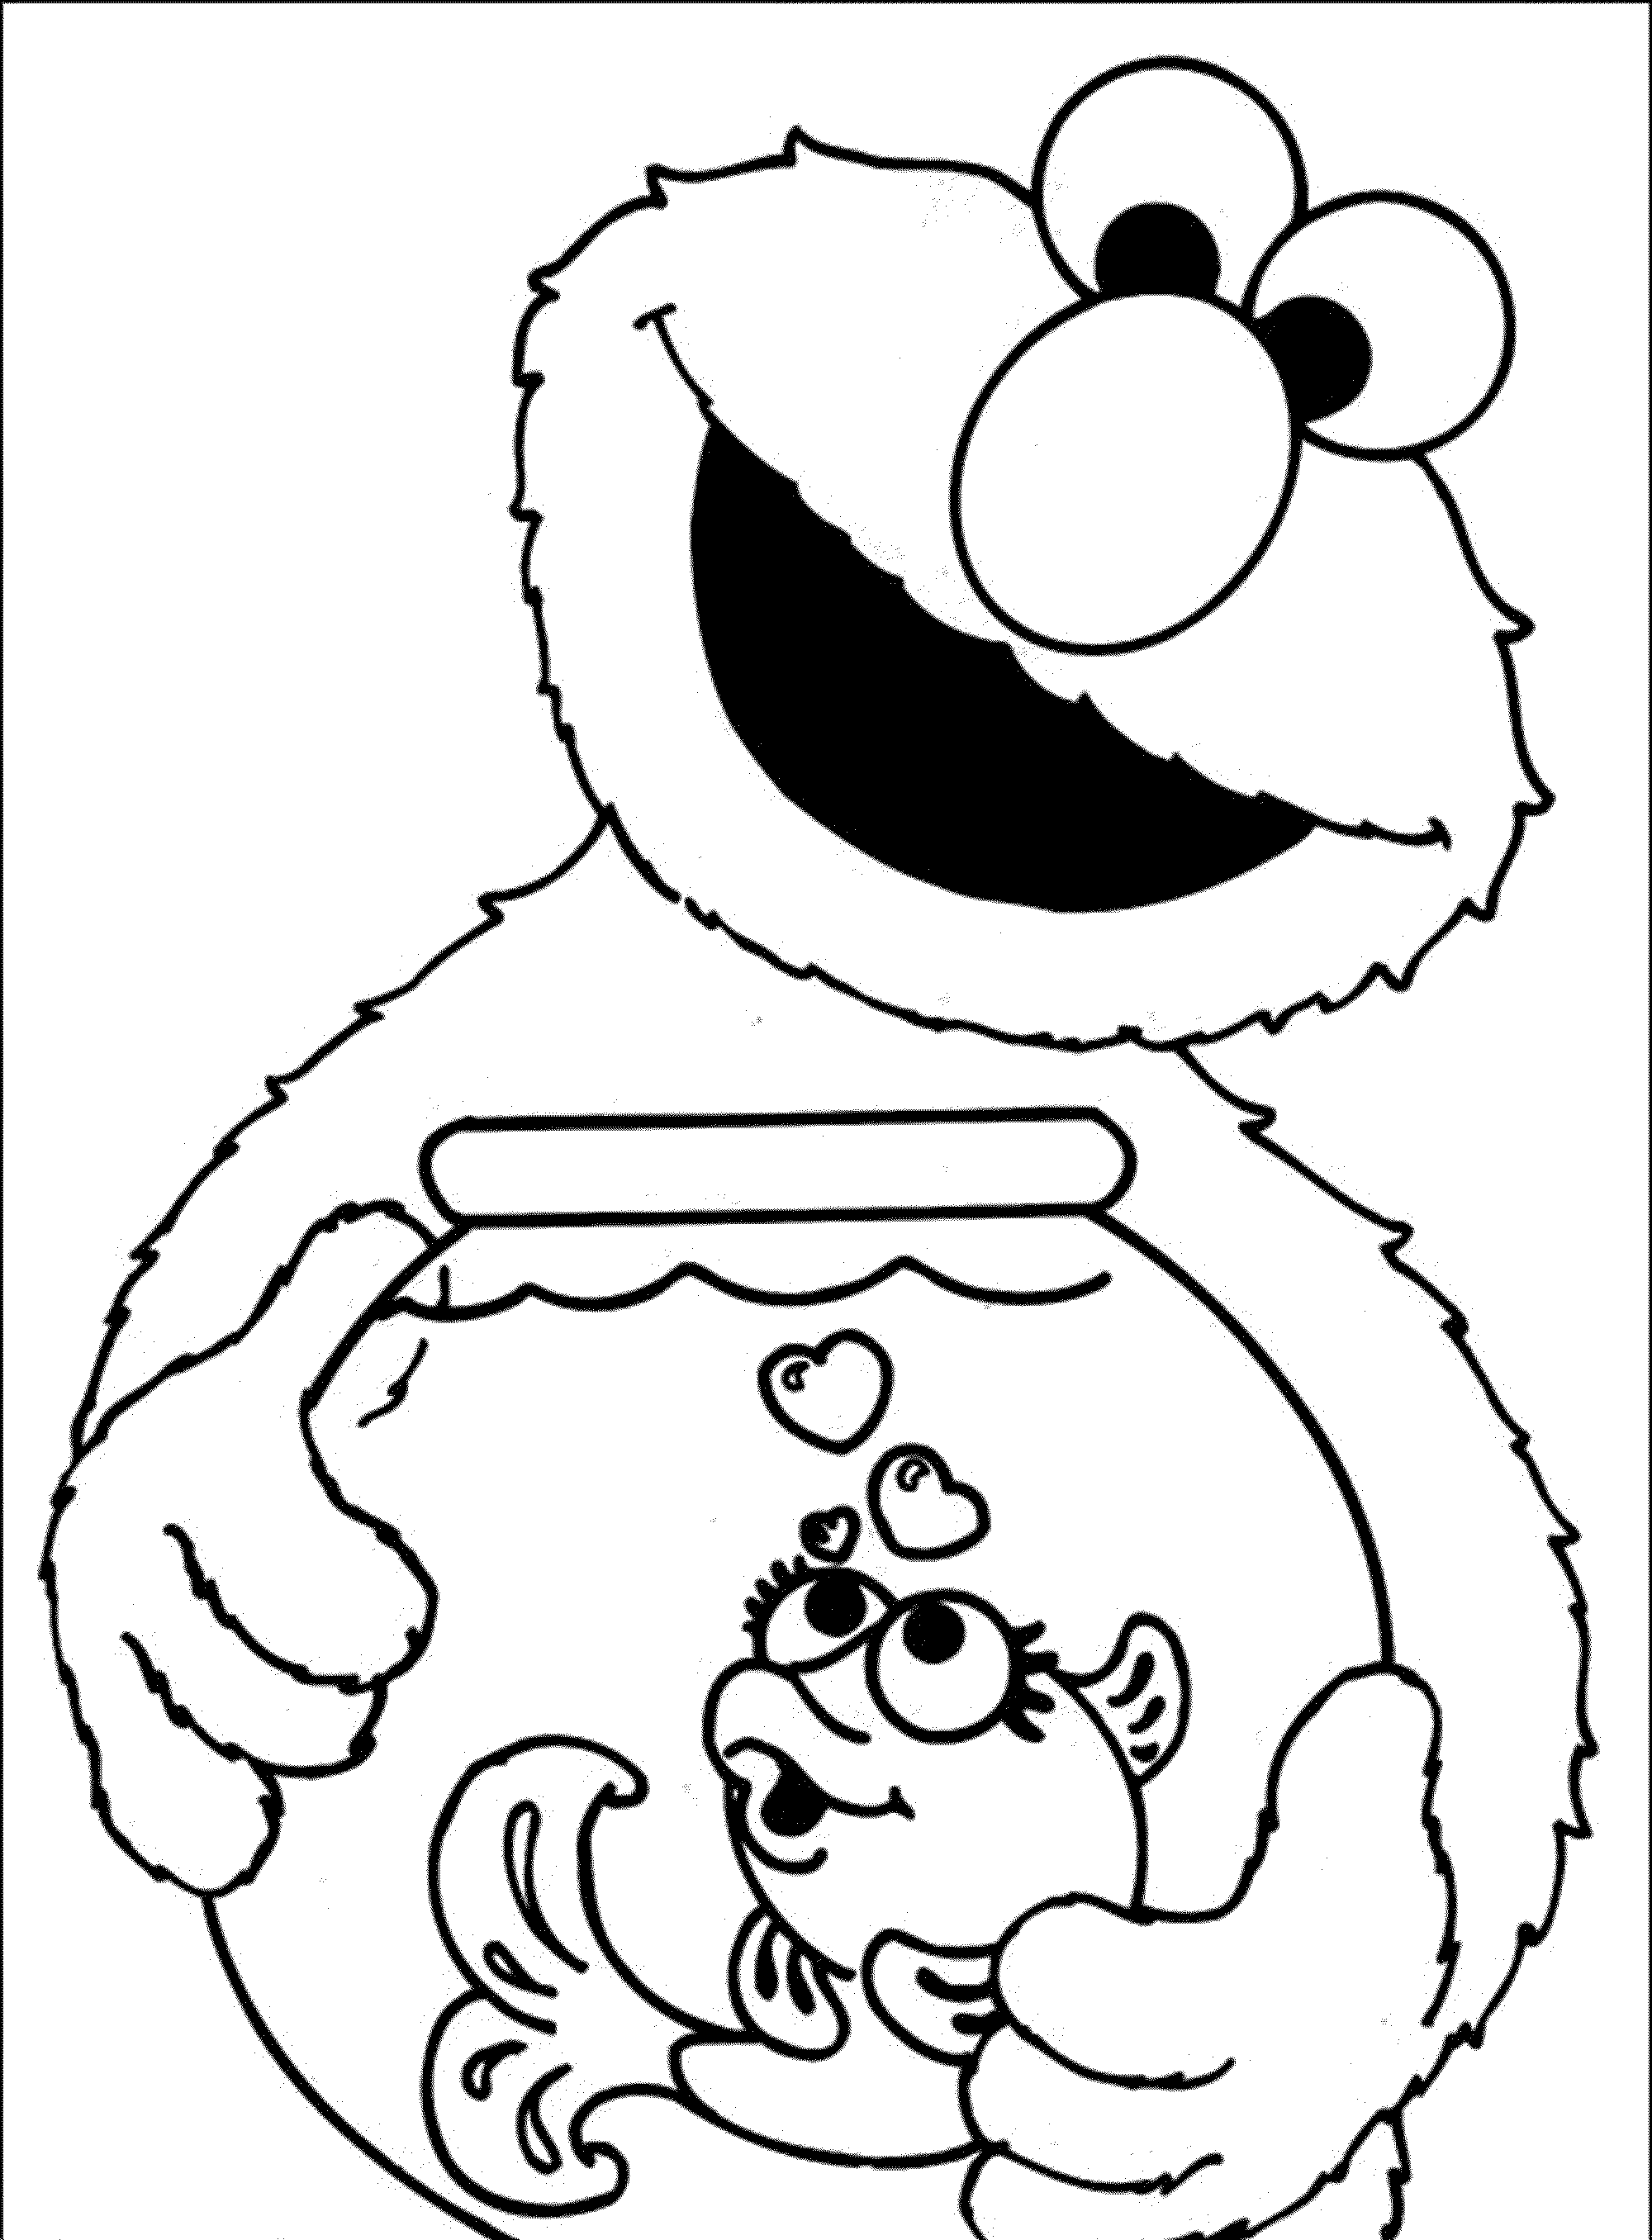 elmo-and-dorothy-coloring-pages-bestappsforkids